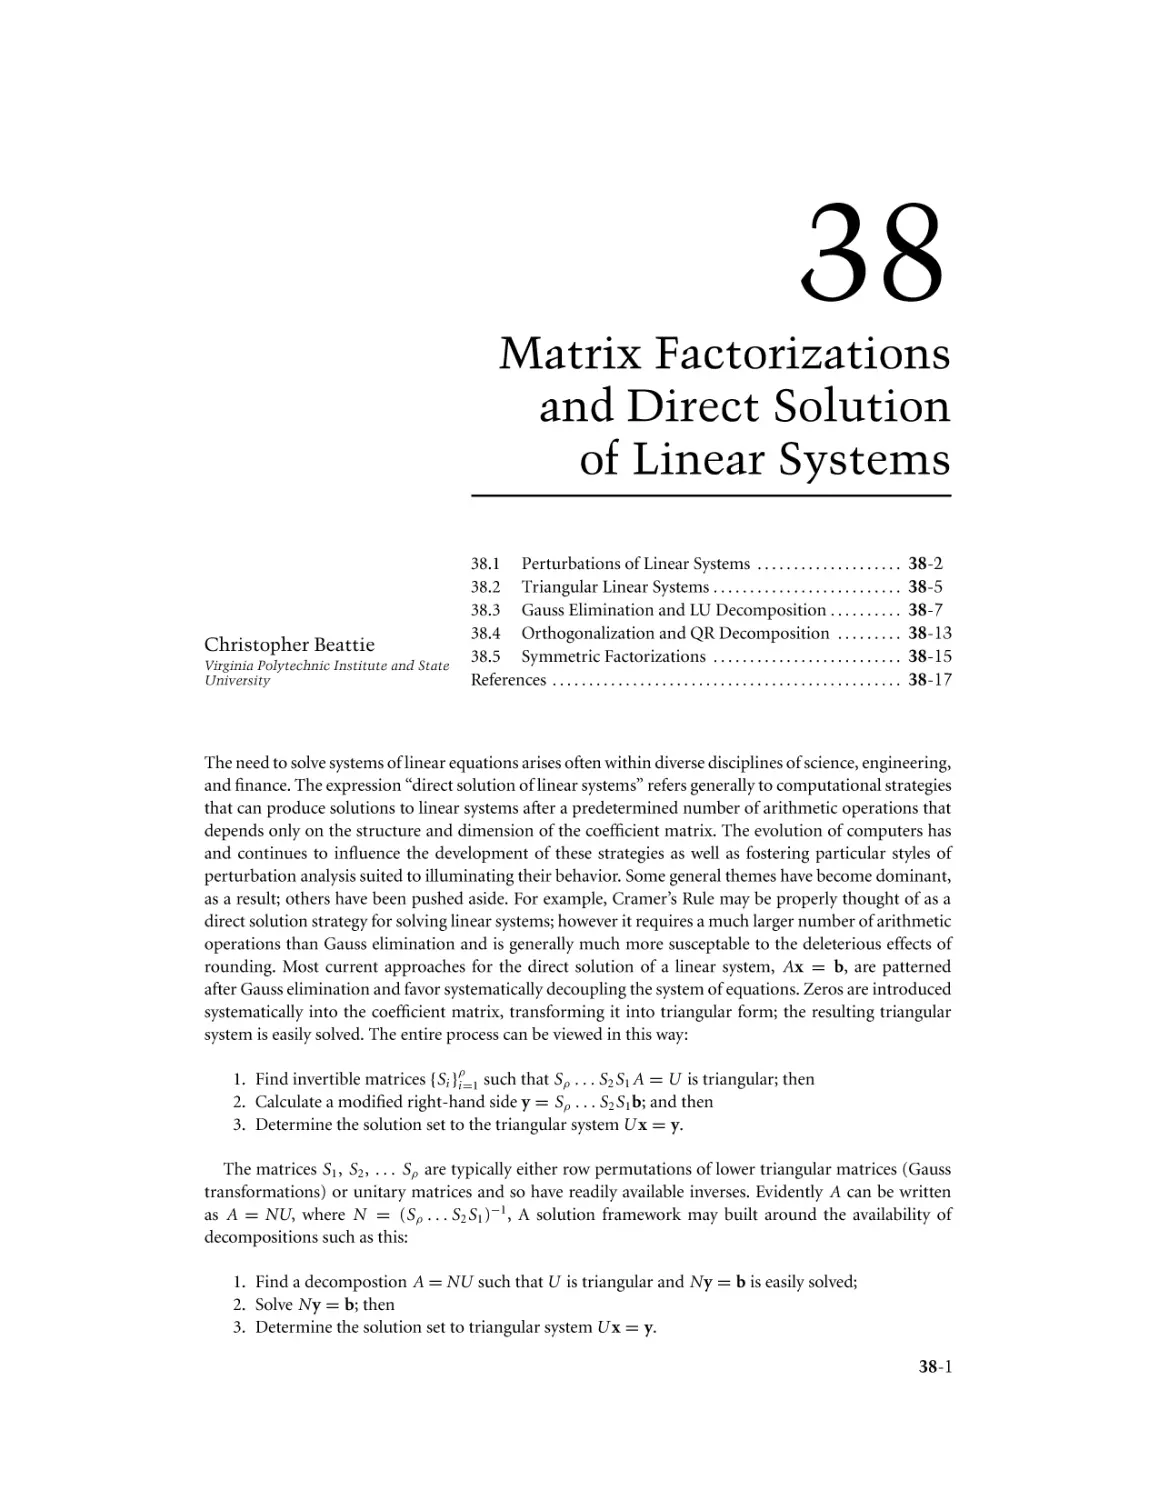 Chapter 38. Matrix Factorizations and Direct Solution of Linear Systems